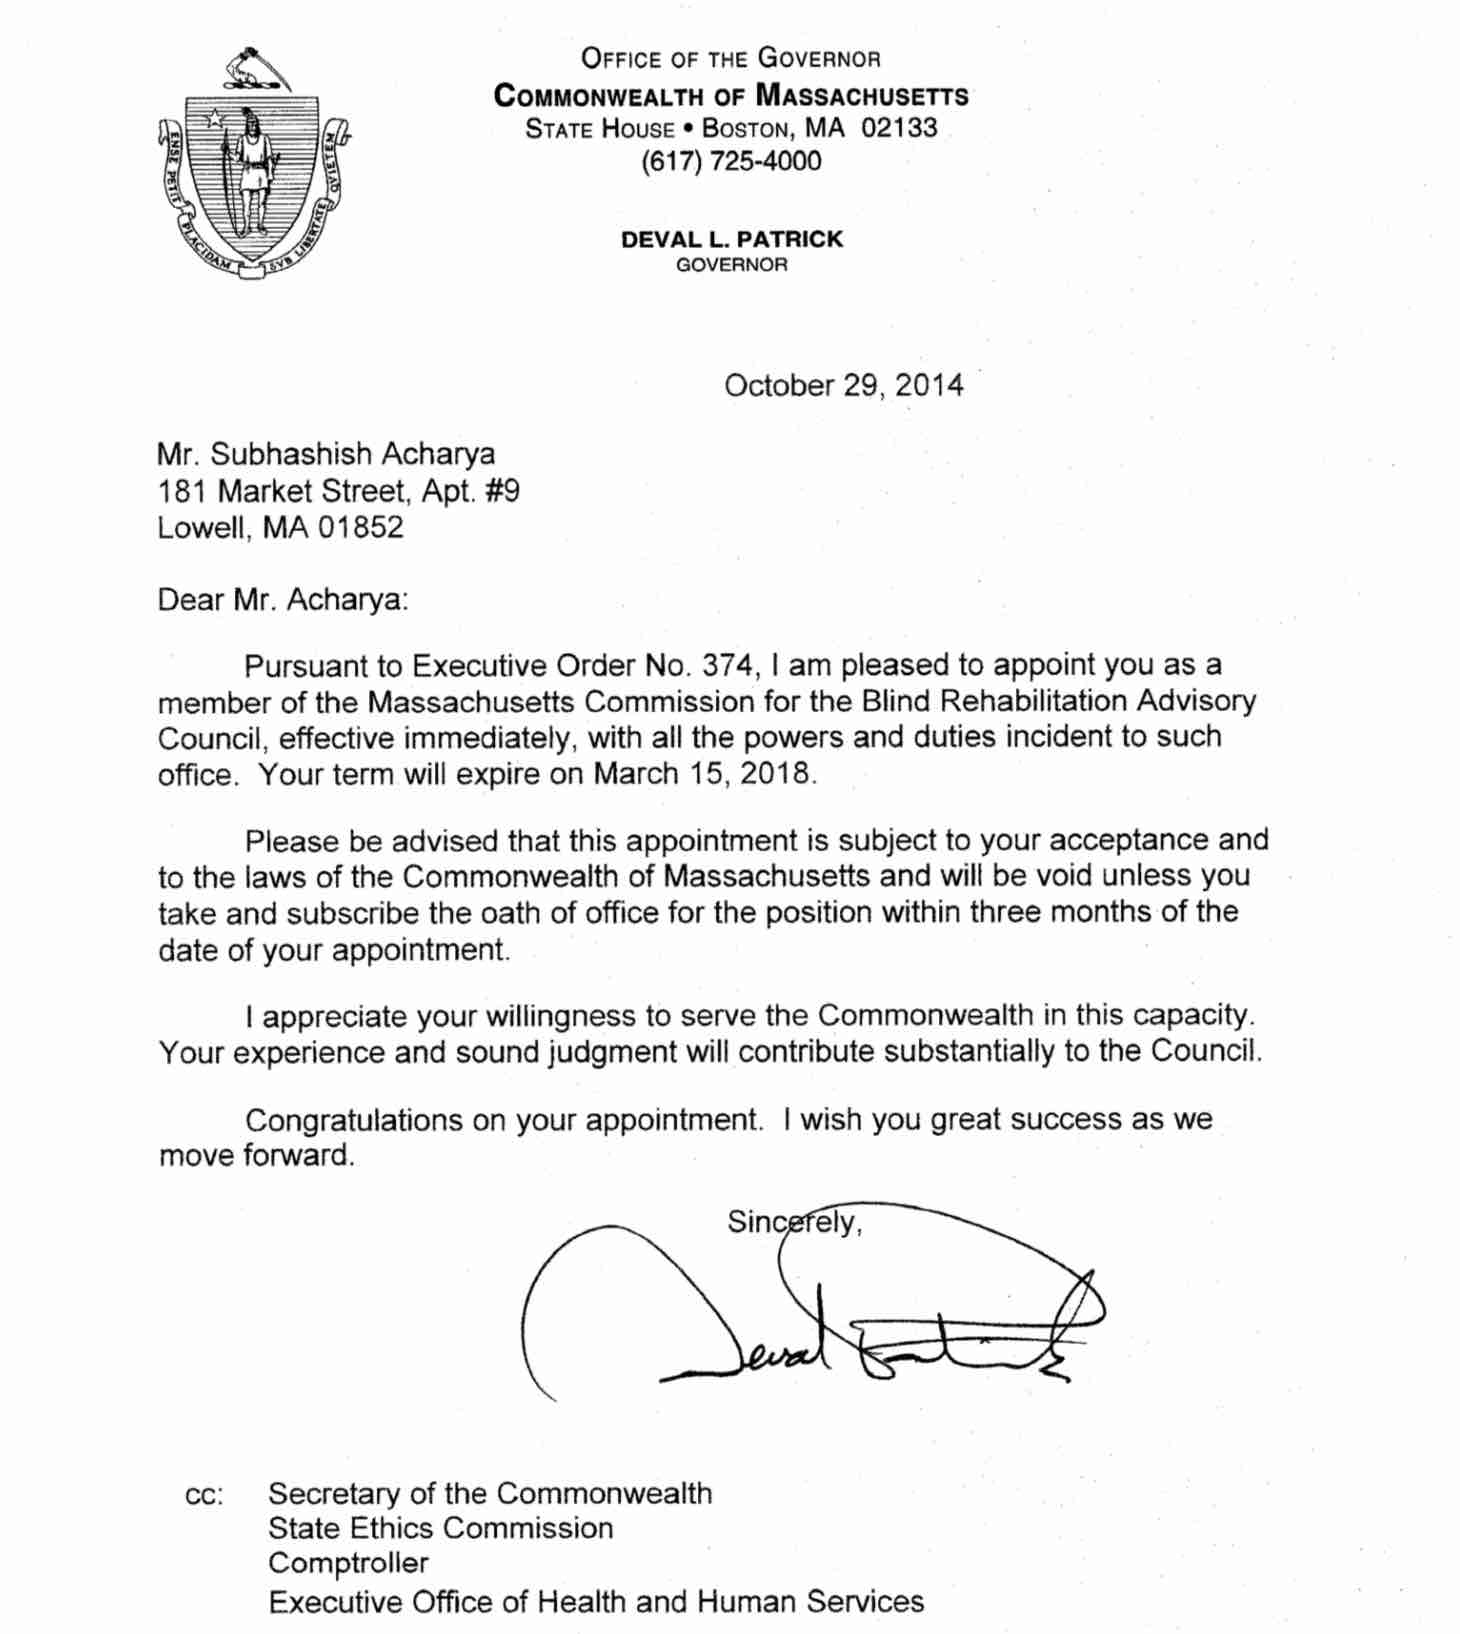 Appointment by the Governor of Massachusetts